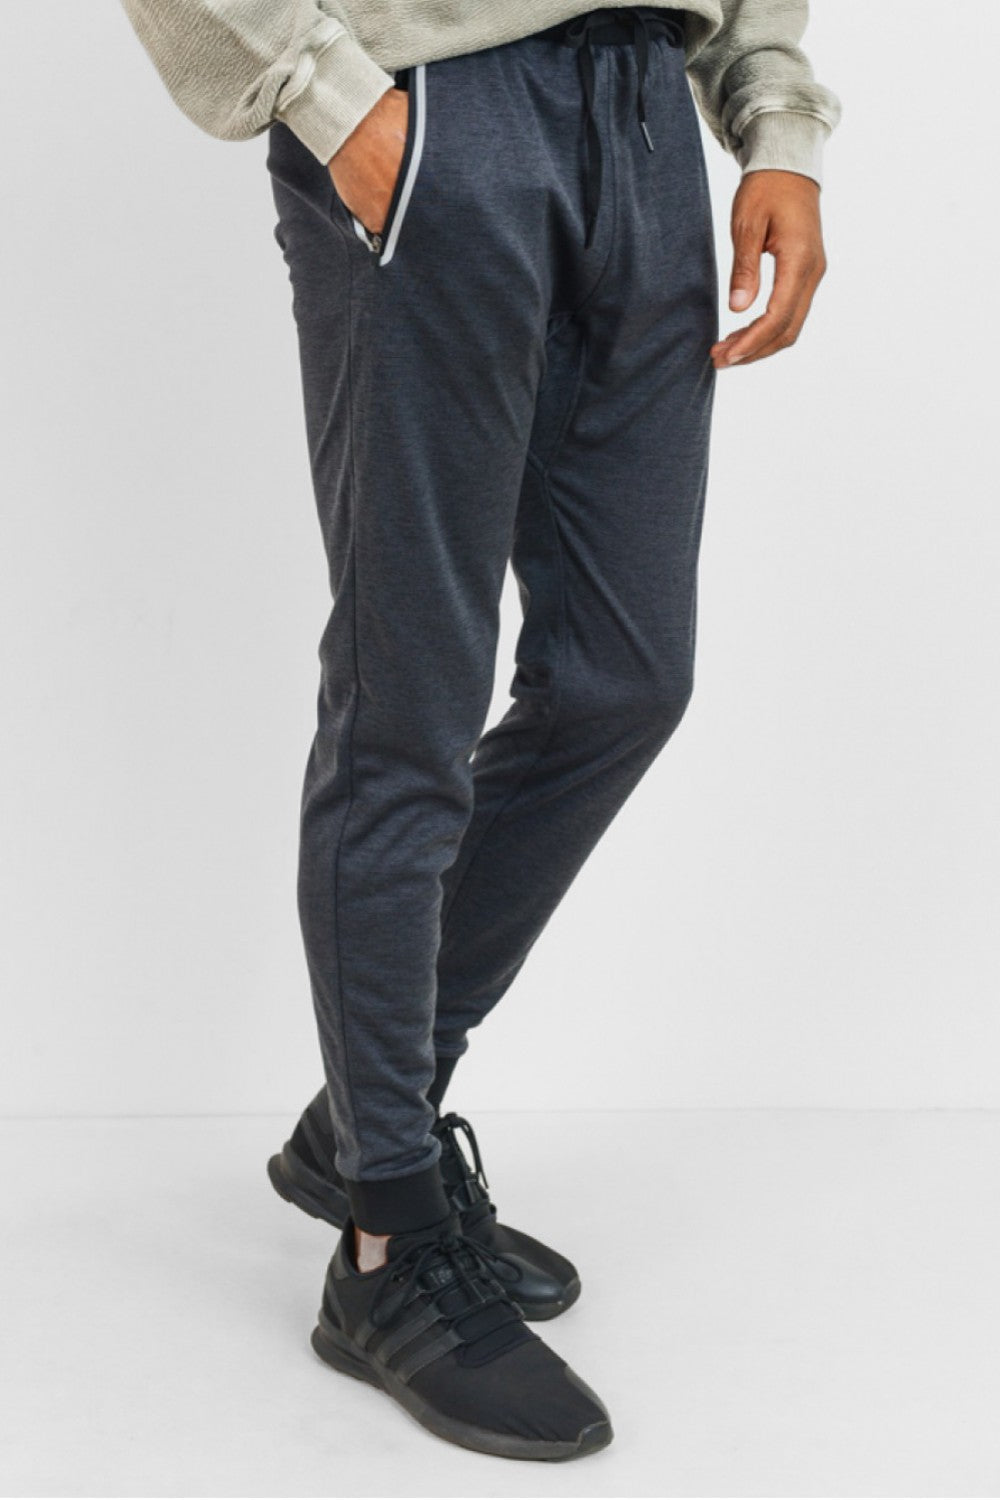 Crafted using 100% polyester melange fabric, these active joggers have two slanted and zippered pockets on each side (with contrasting frame), black ankle cuffs, and black waist band with outer drawstring cord.